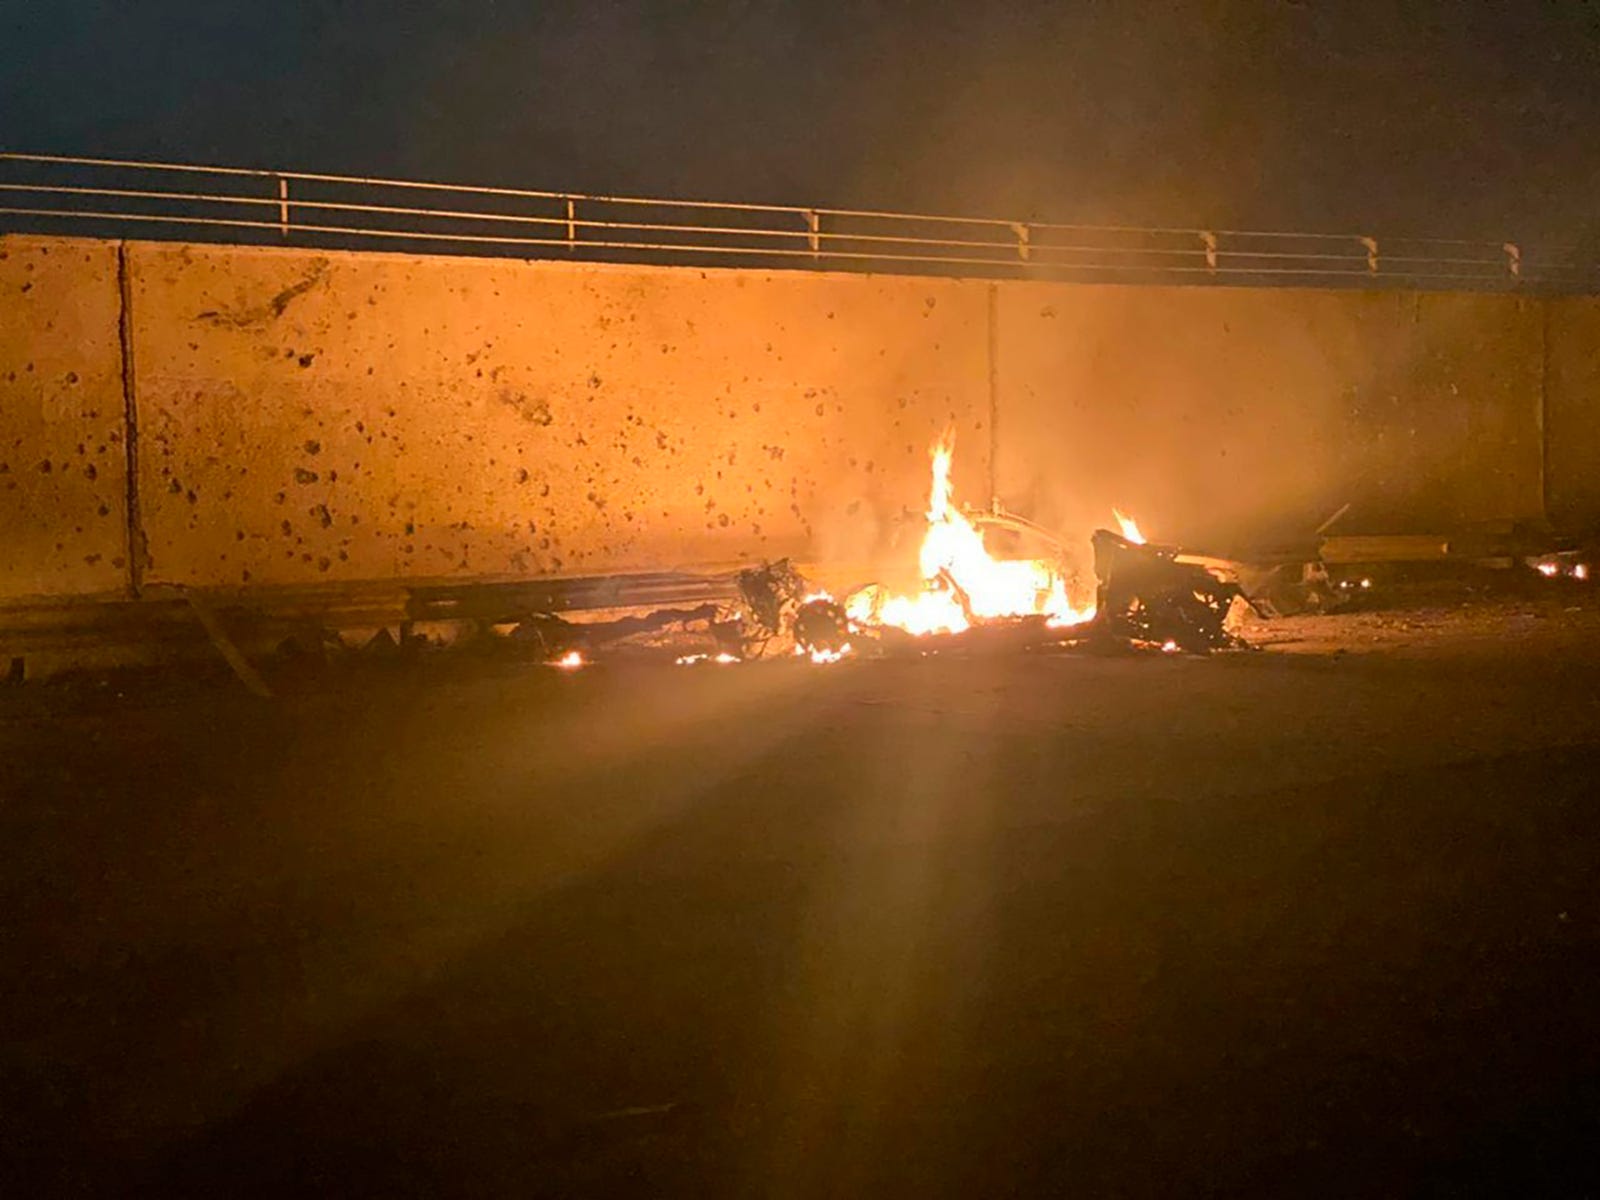 This image released by the Iraqi Prime Minister's News shows a car burning at Baghdad International Airport following an airplane, in Baghdad, Iraq, early Friday, Jan. 3, 2020.